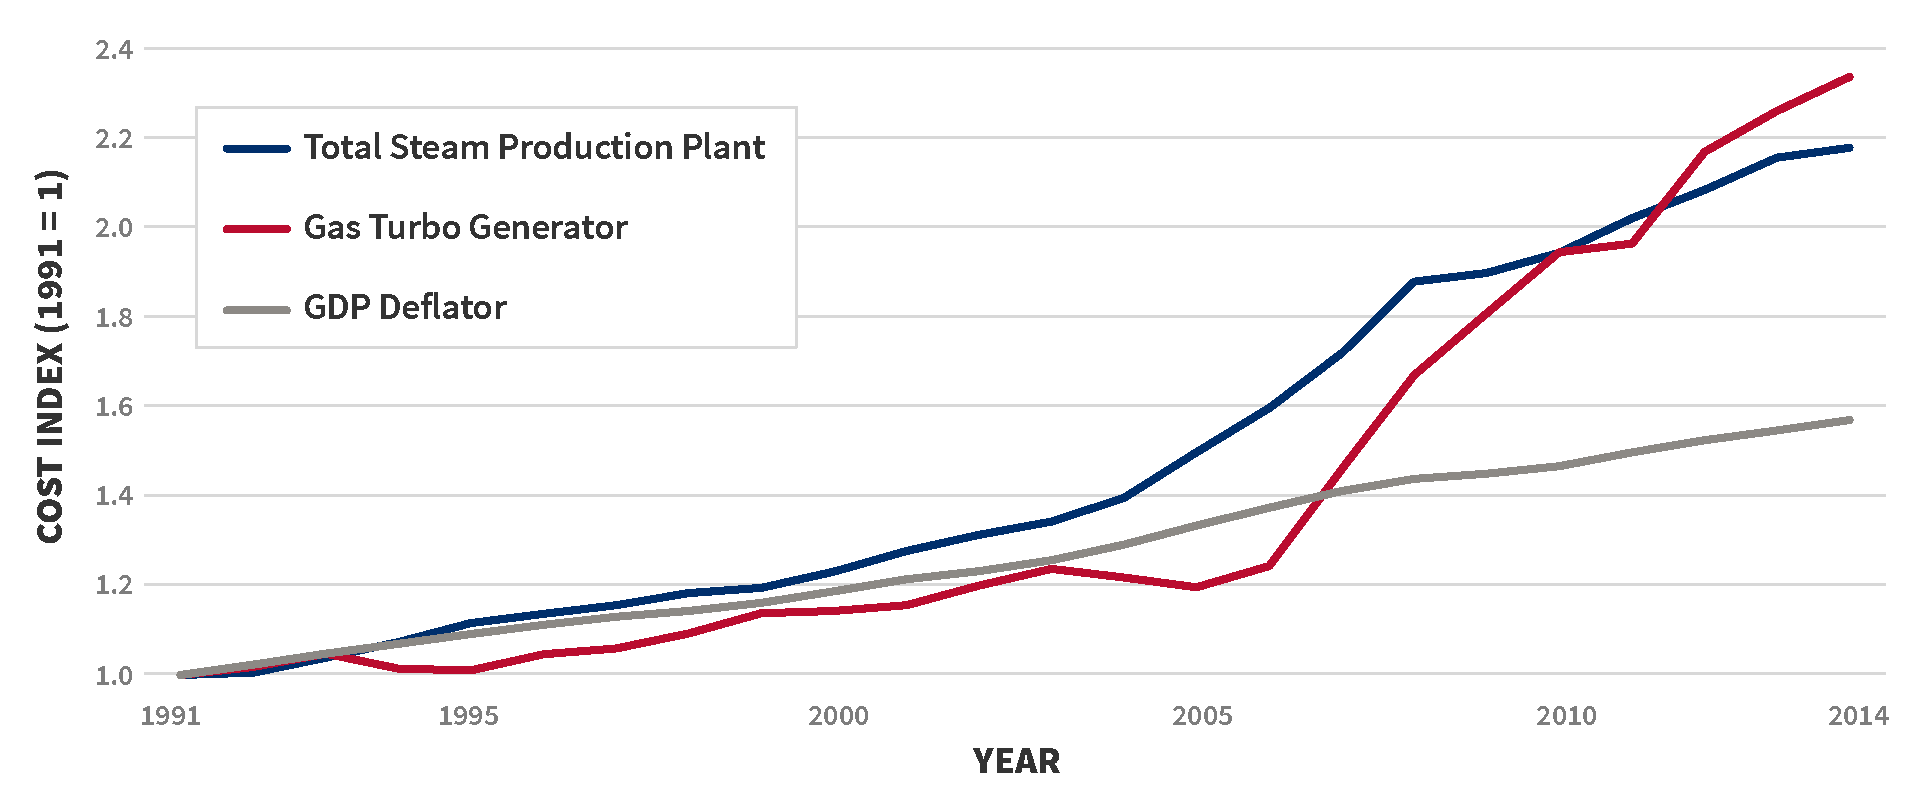 From 1991–2004, total steam production plant, gas turbo generator and GDP deflator all rise together at roughly the same gradual linear rate to approximately 1.3 times 1991 values. After 2004, GDP deflator continues to rise at the previous rate to almost 1.6 times 1991 values by 2014, while total steam production plant shifts to a steeper increase reaching almost 2.2 times 1991 values by 2014. After 2006, gas turbo generator begins a dramatic rate of increase, surpassing total steam production plant by 2012 and exceeding 2.3 times 1991 values by 2014.